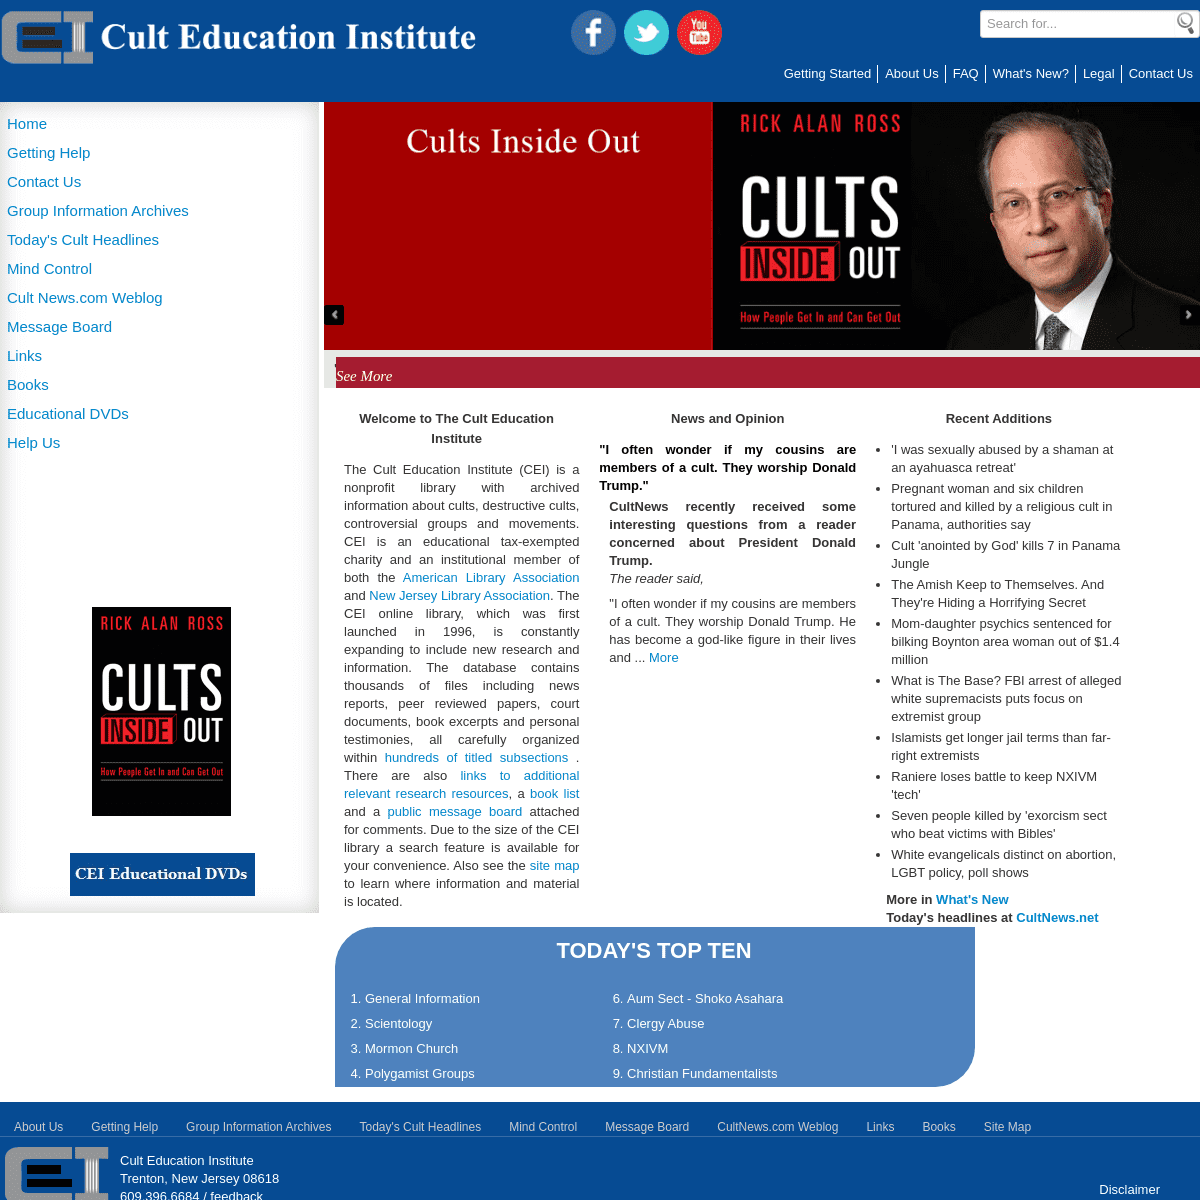 A complete backup of culteducation.com